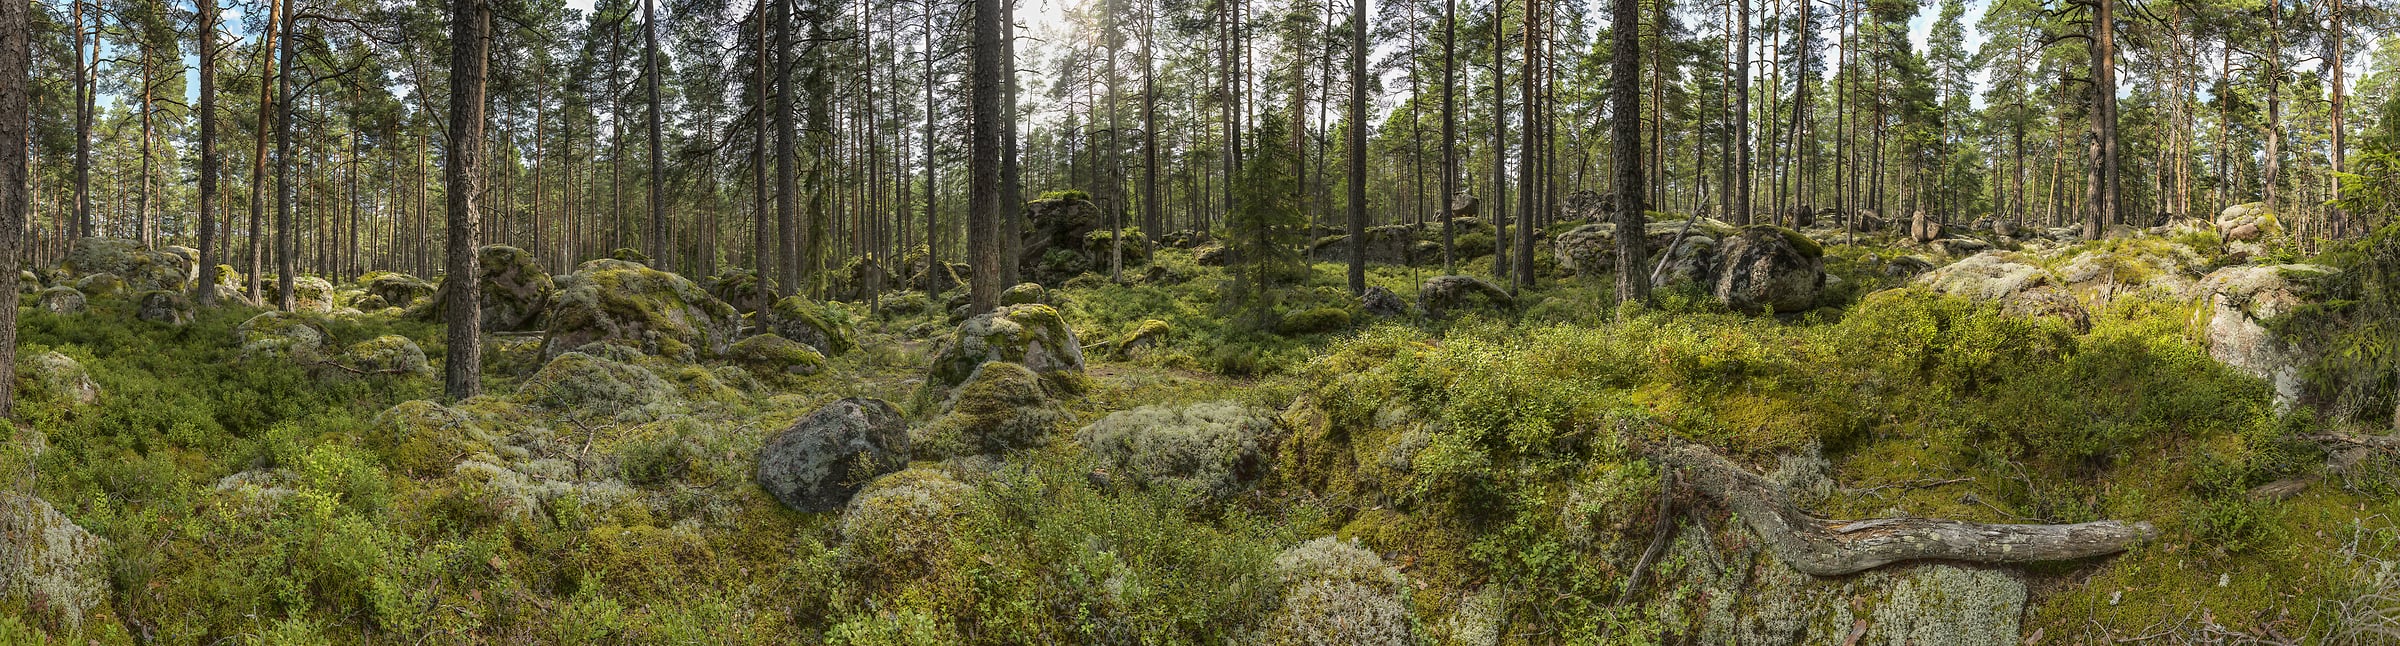 6,131 megapixels! A very high resolution, VAST photo of a forest created by Alfred Feil in Sweden.